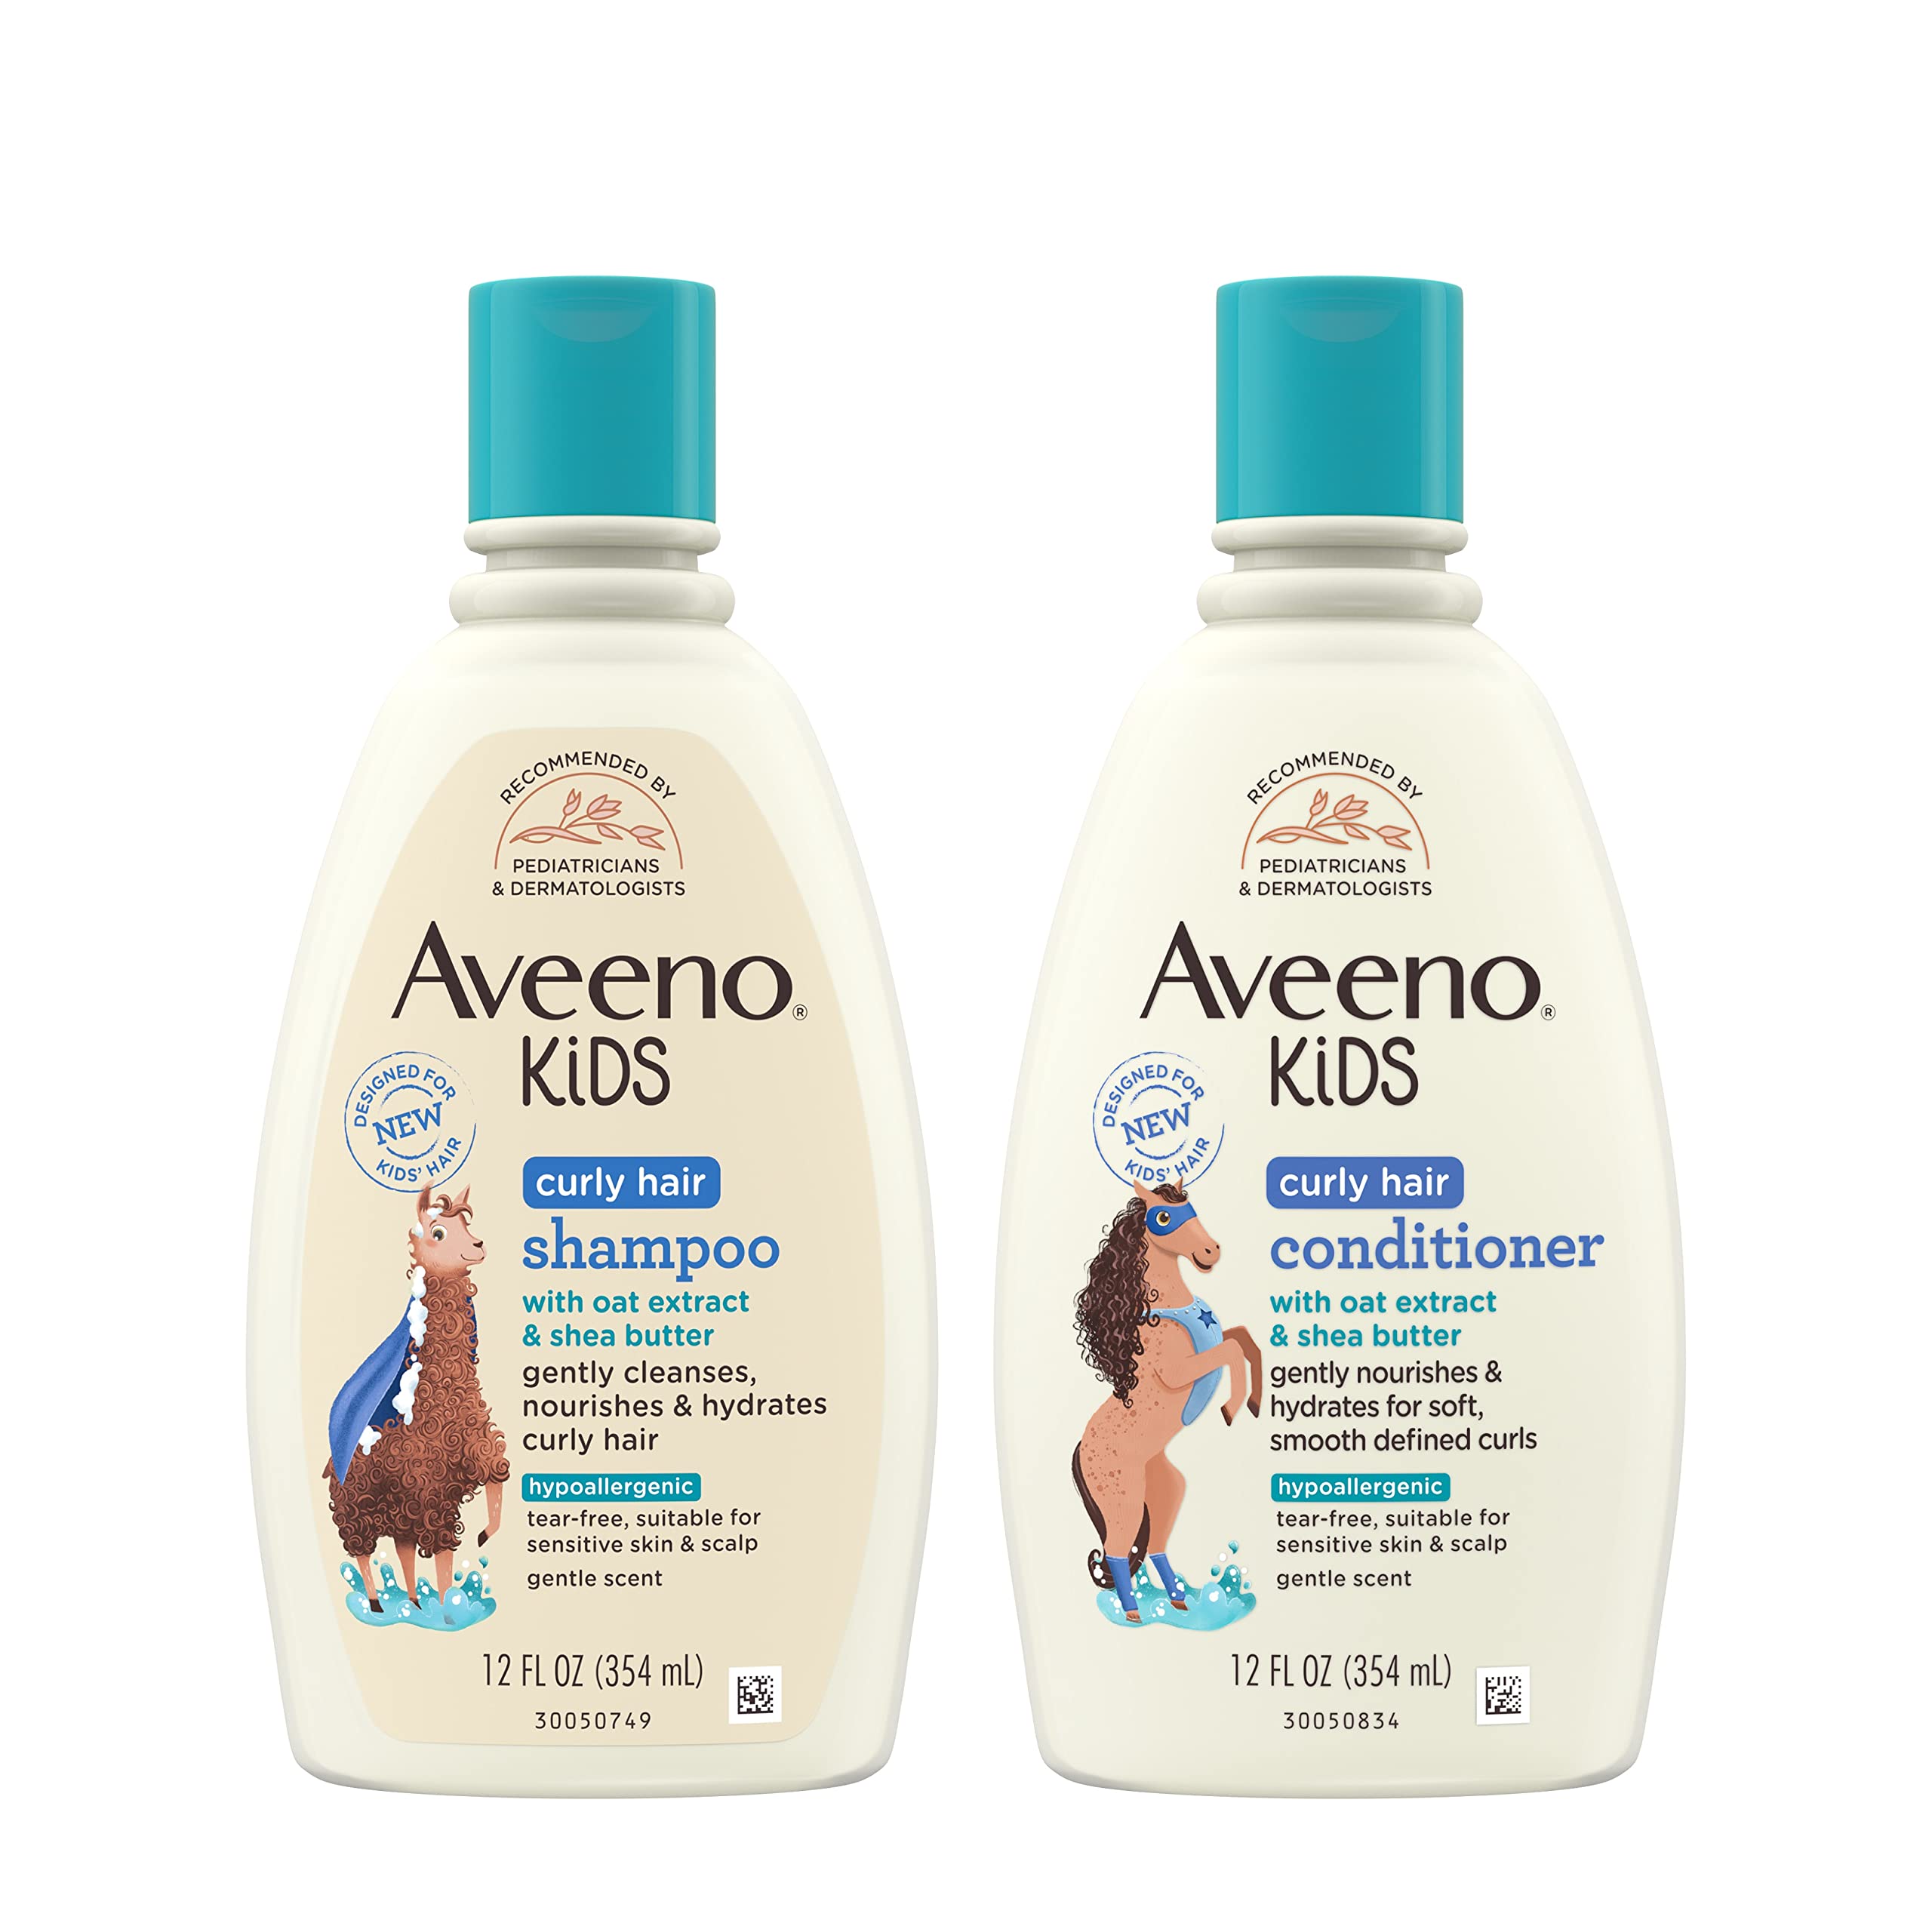 Aveeno Kids Curly Hair Shampoo With Oat Extract & Shea Butter, 12 fl. Oz with Aveeno Kids Curly Hair Conditioner, Gently Nourishes & Hydrates for Defined Curls, Hypoallergenic, 12 fl. Oz